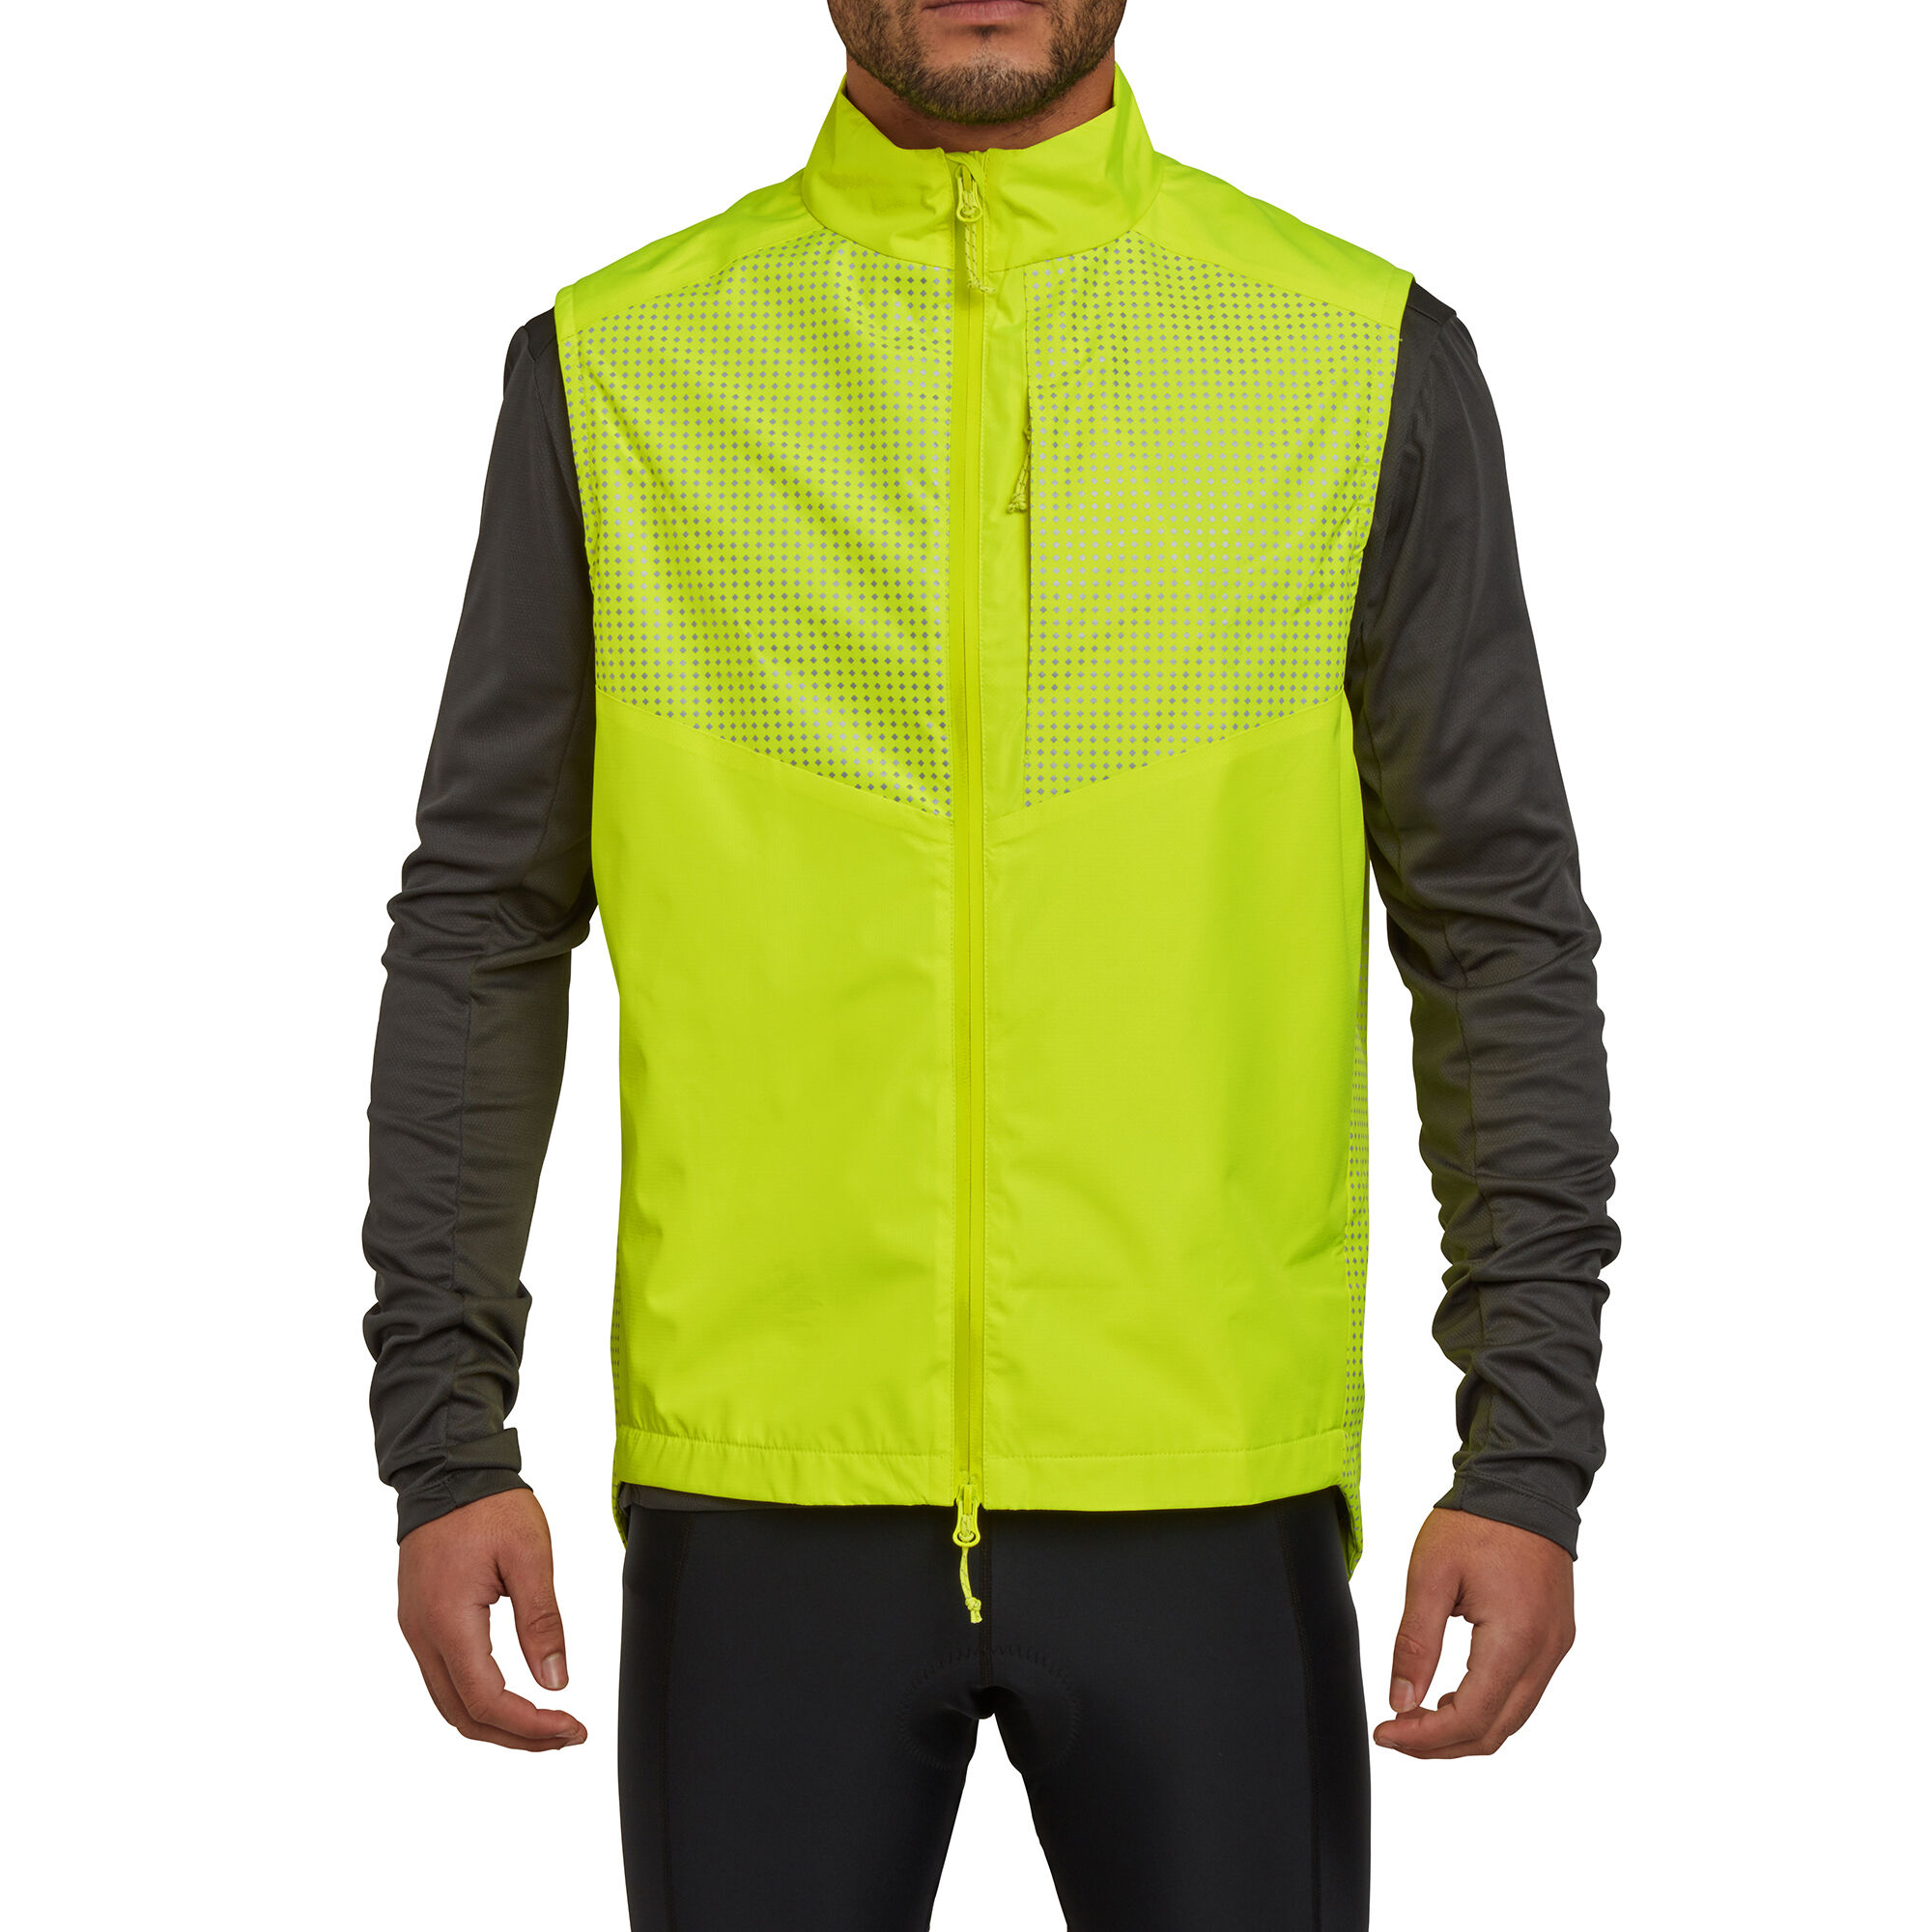 Altura Nightvision Thermique - Cycling vest - Men's